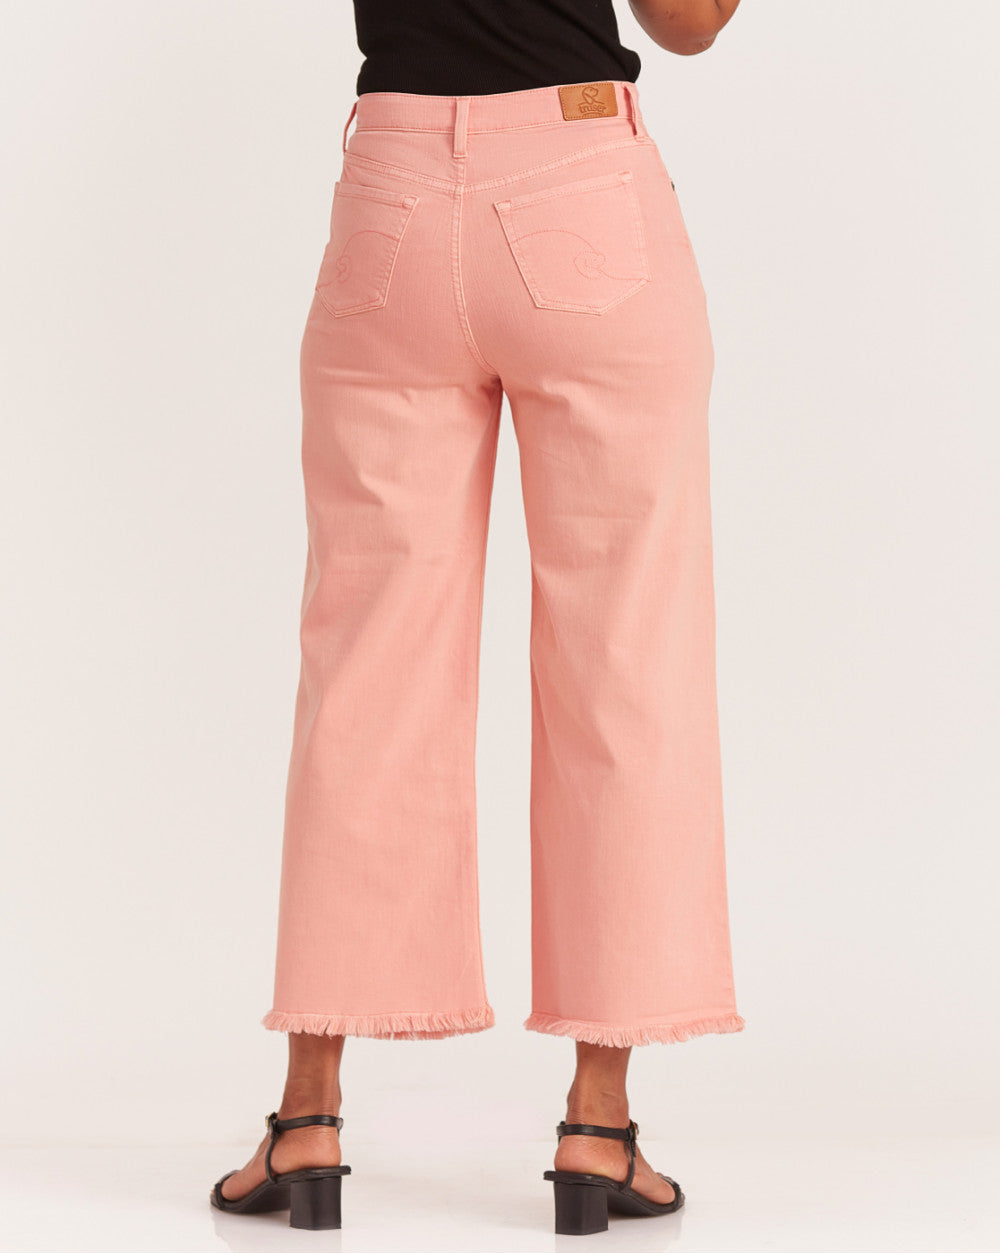 Wide Leg High Waist Colored Jeans - Coral